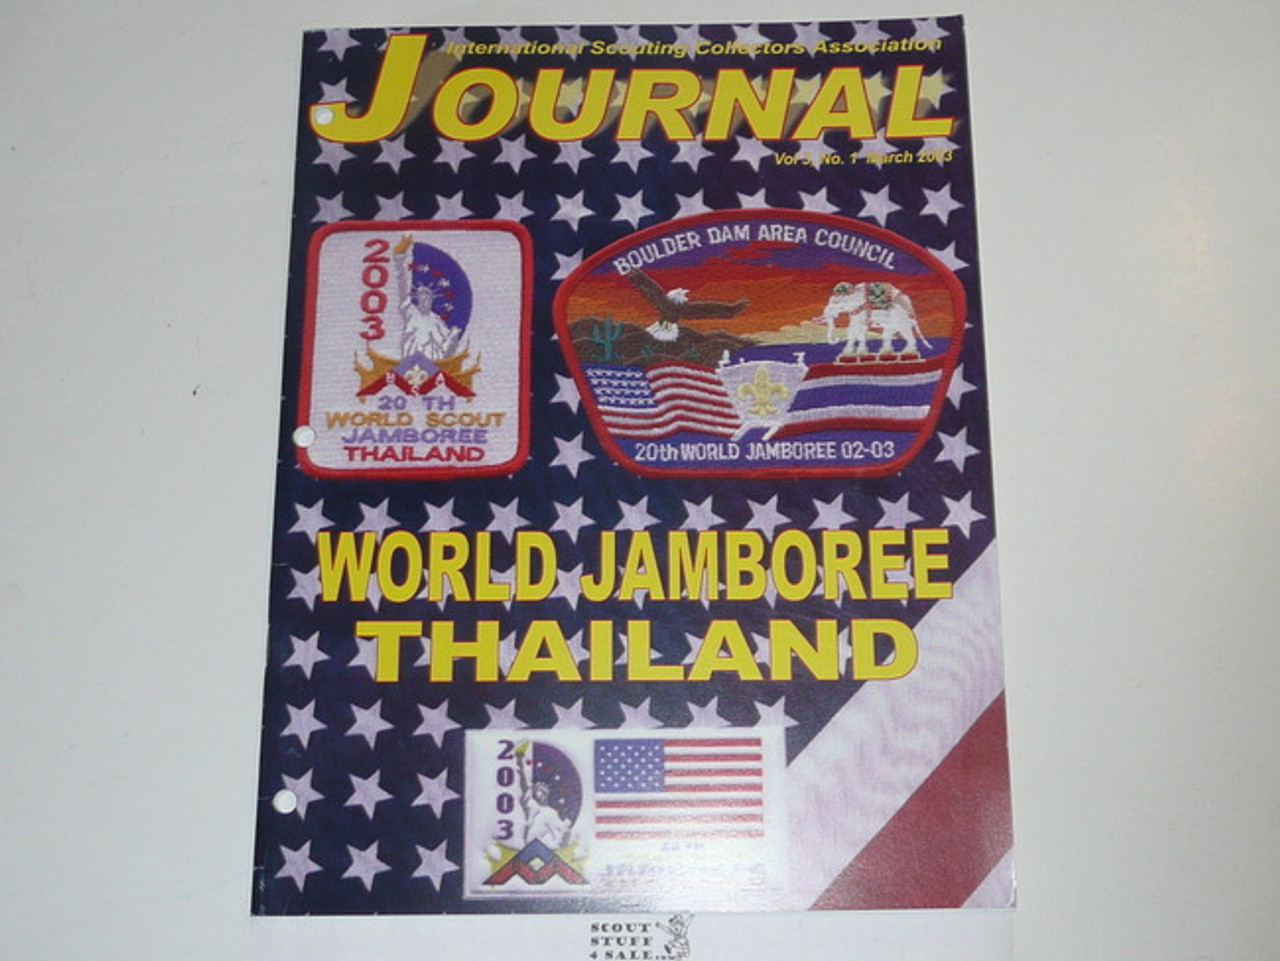 The International Scouting Collectors Association (ISCA) Journal, 2003 March, Vol 3 #1